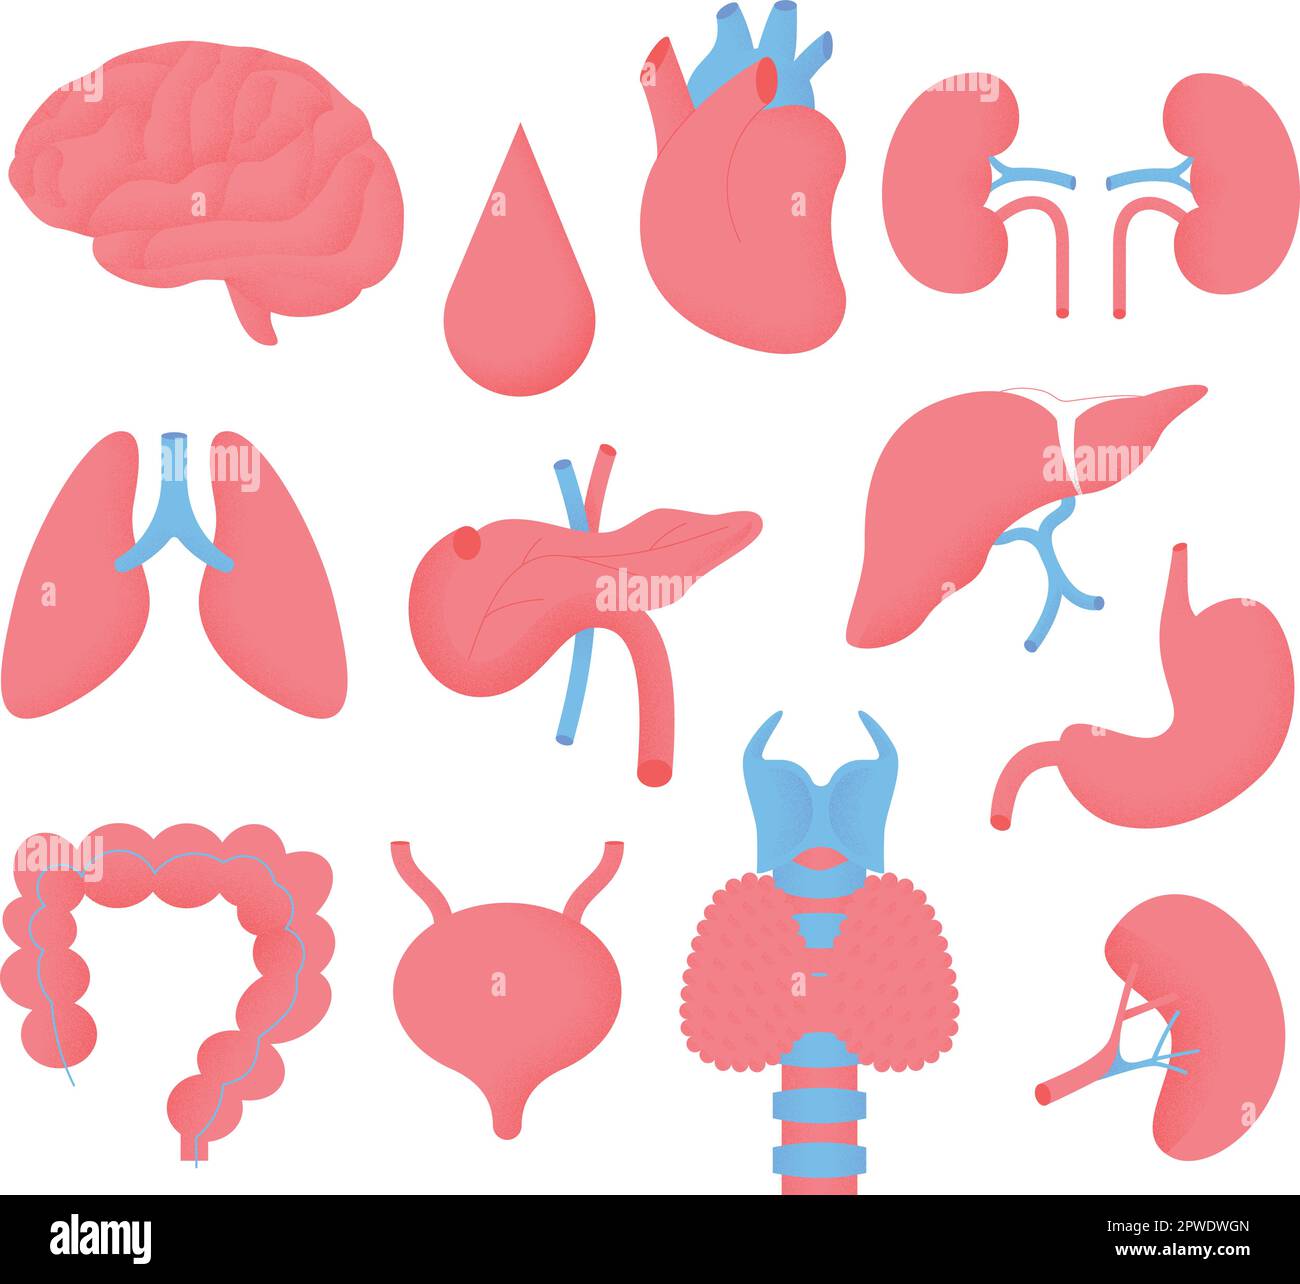 A set of medical illustrations showing organs necessary to the well being of the body Stock Vector